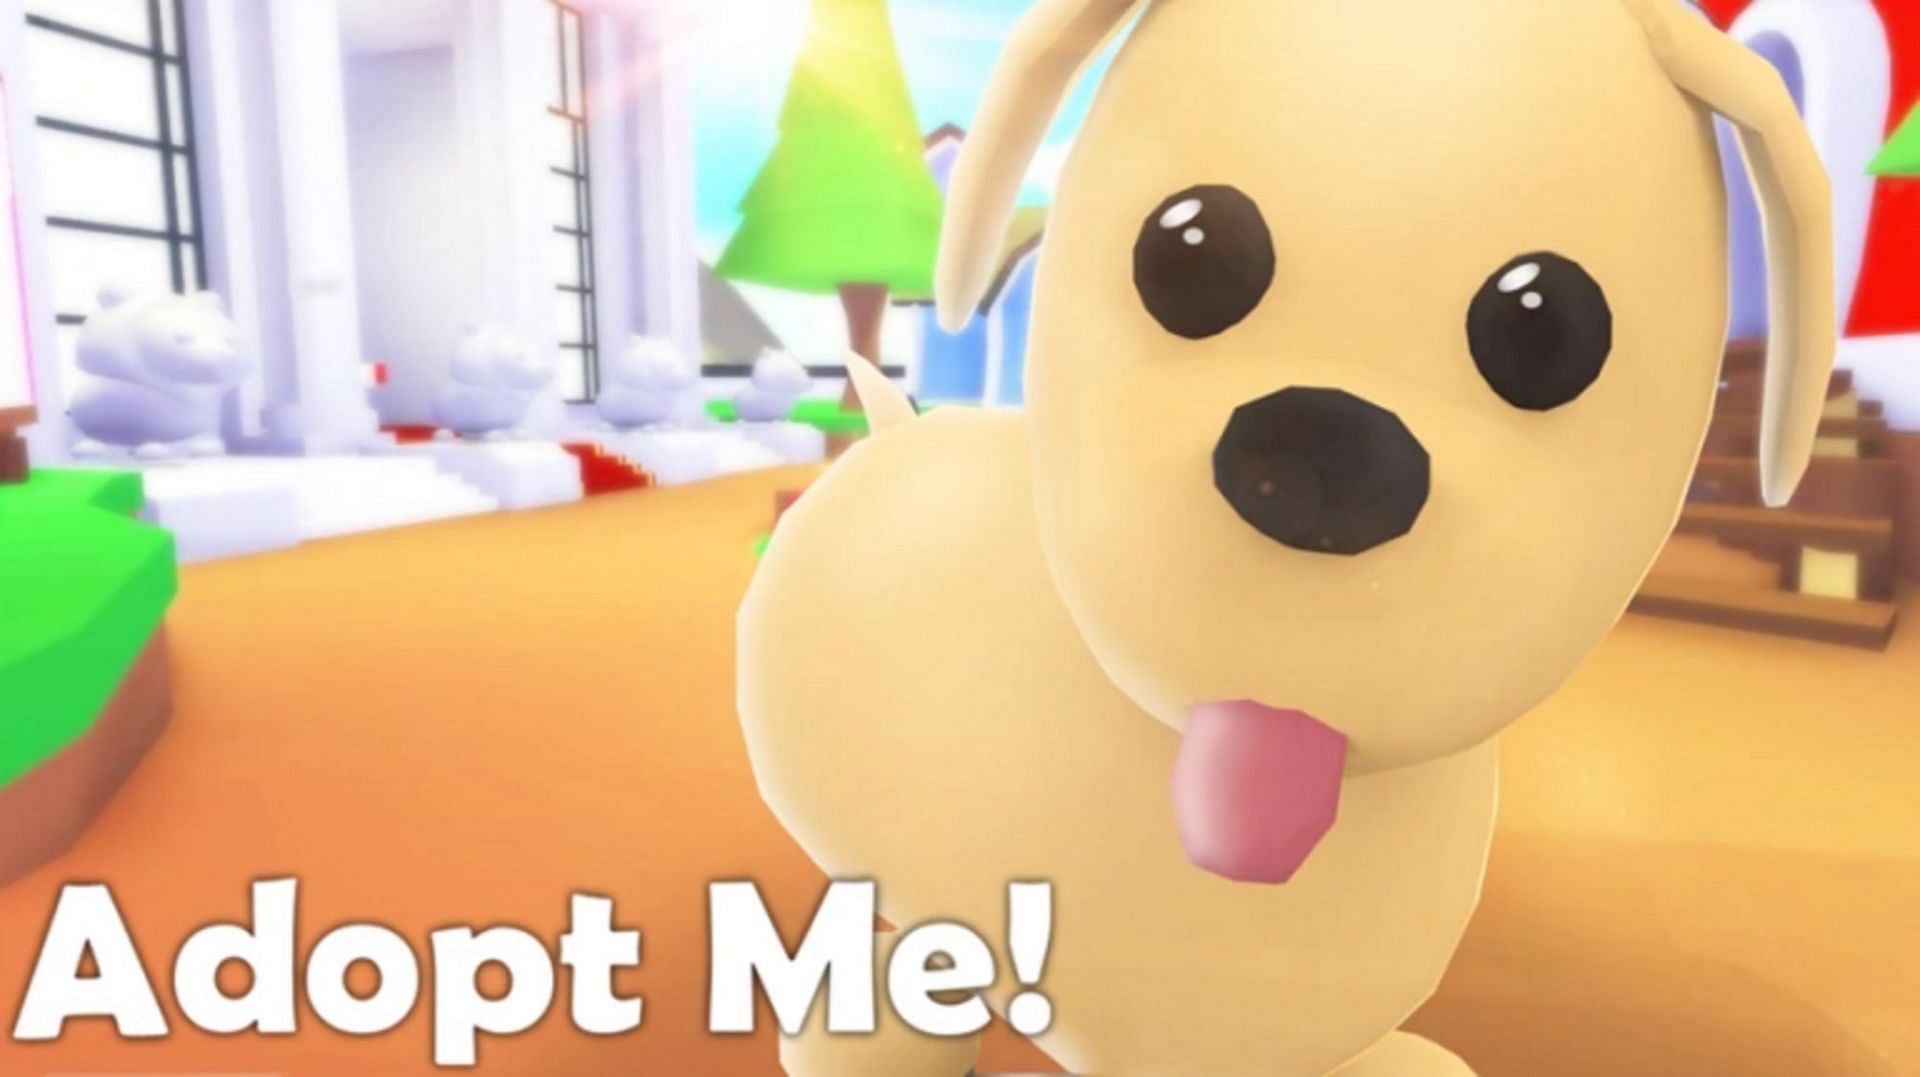 trading mm2 values for adopt me pets｜TikTok Search